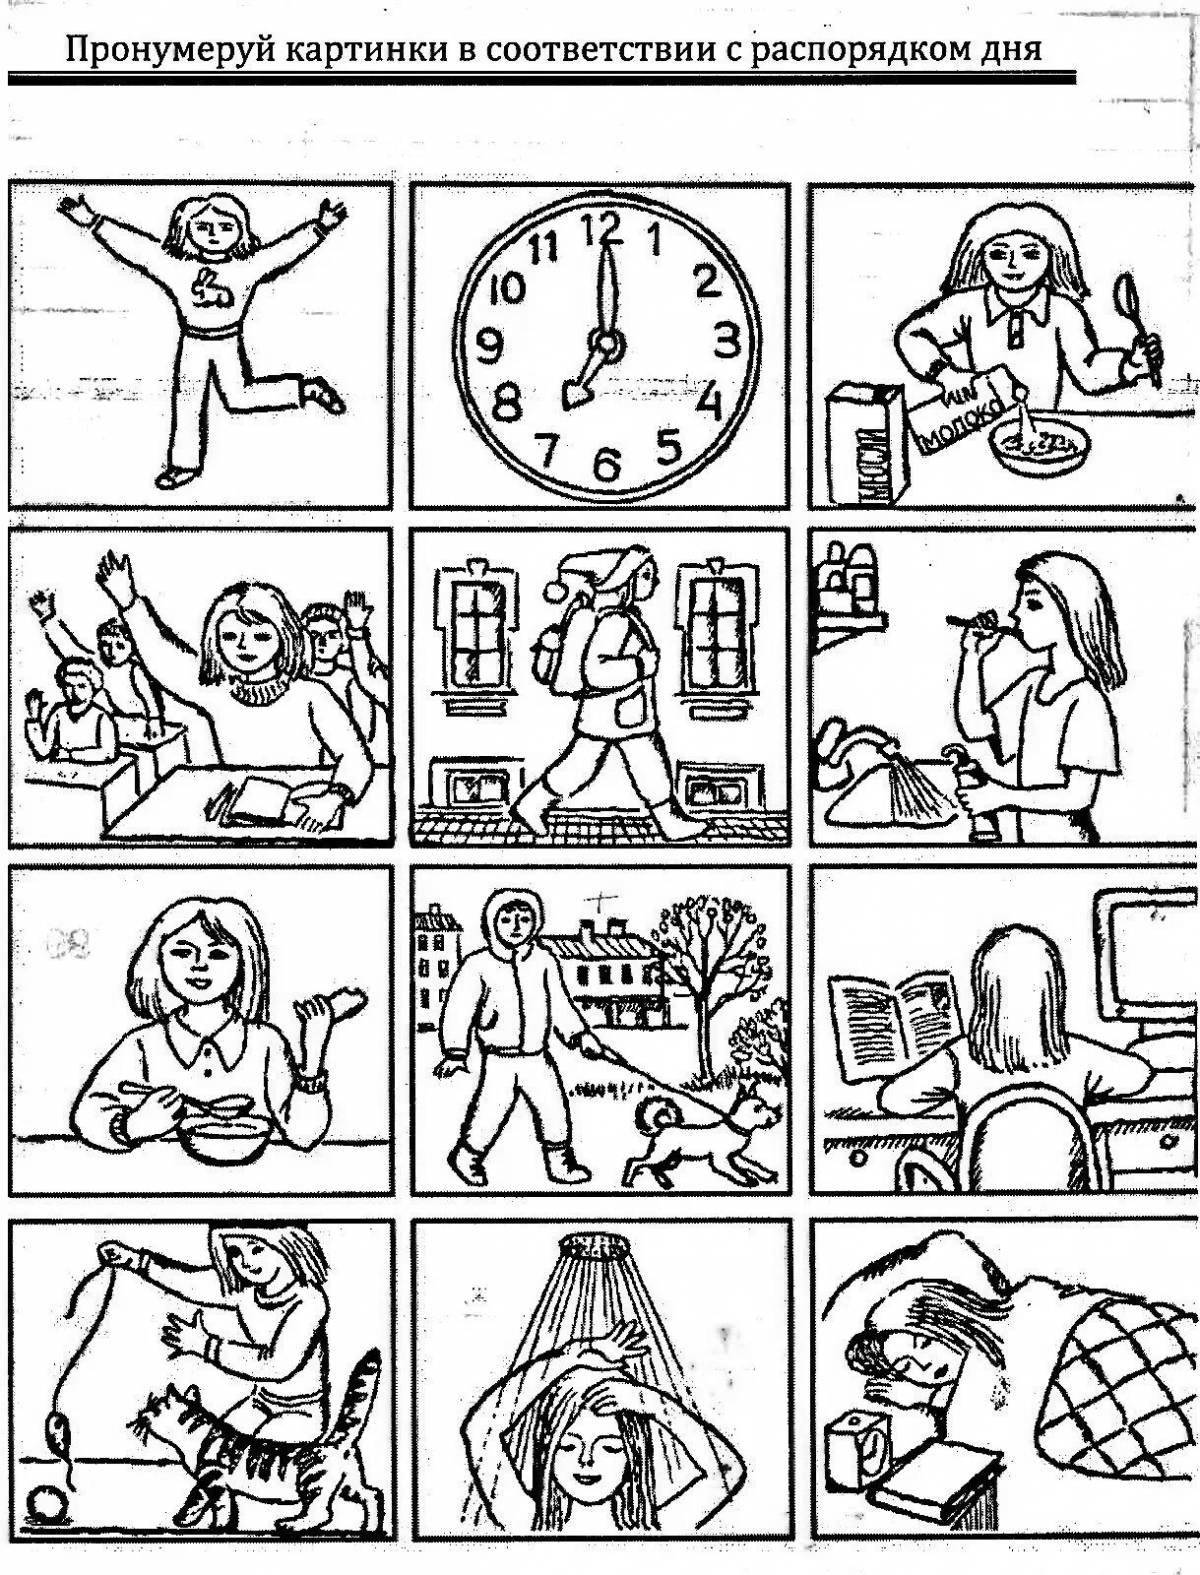 Creative daily routine for first graders